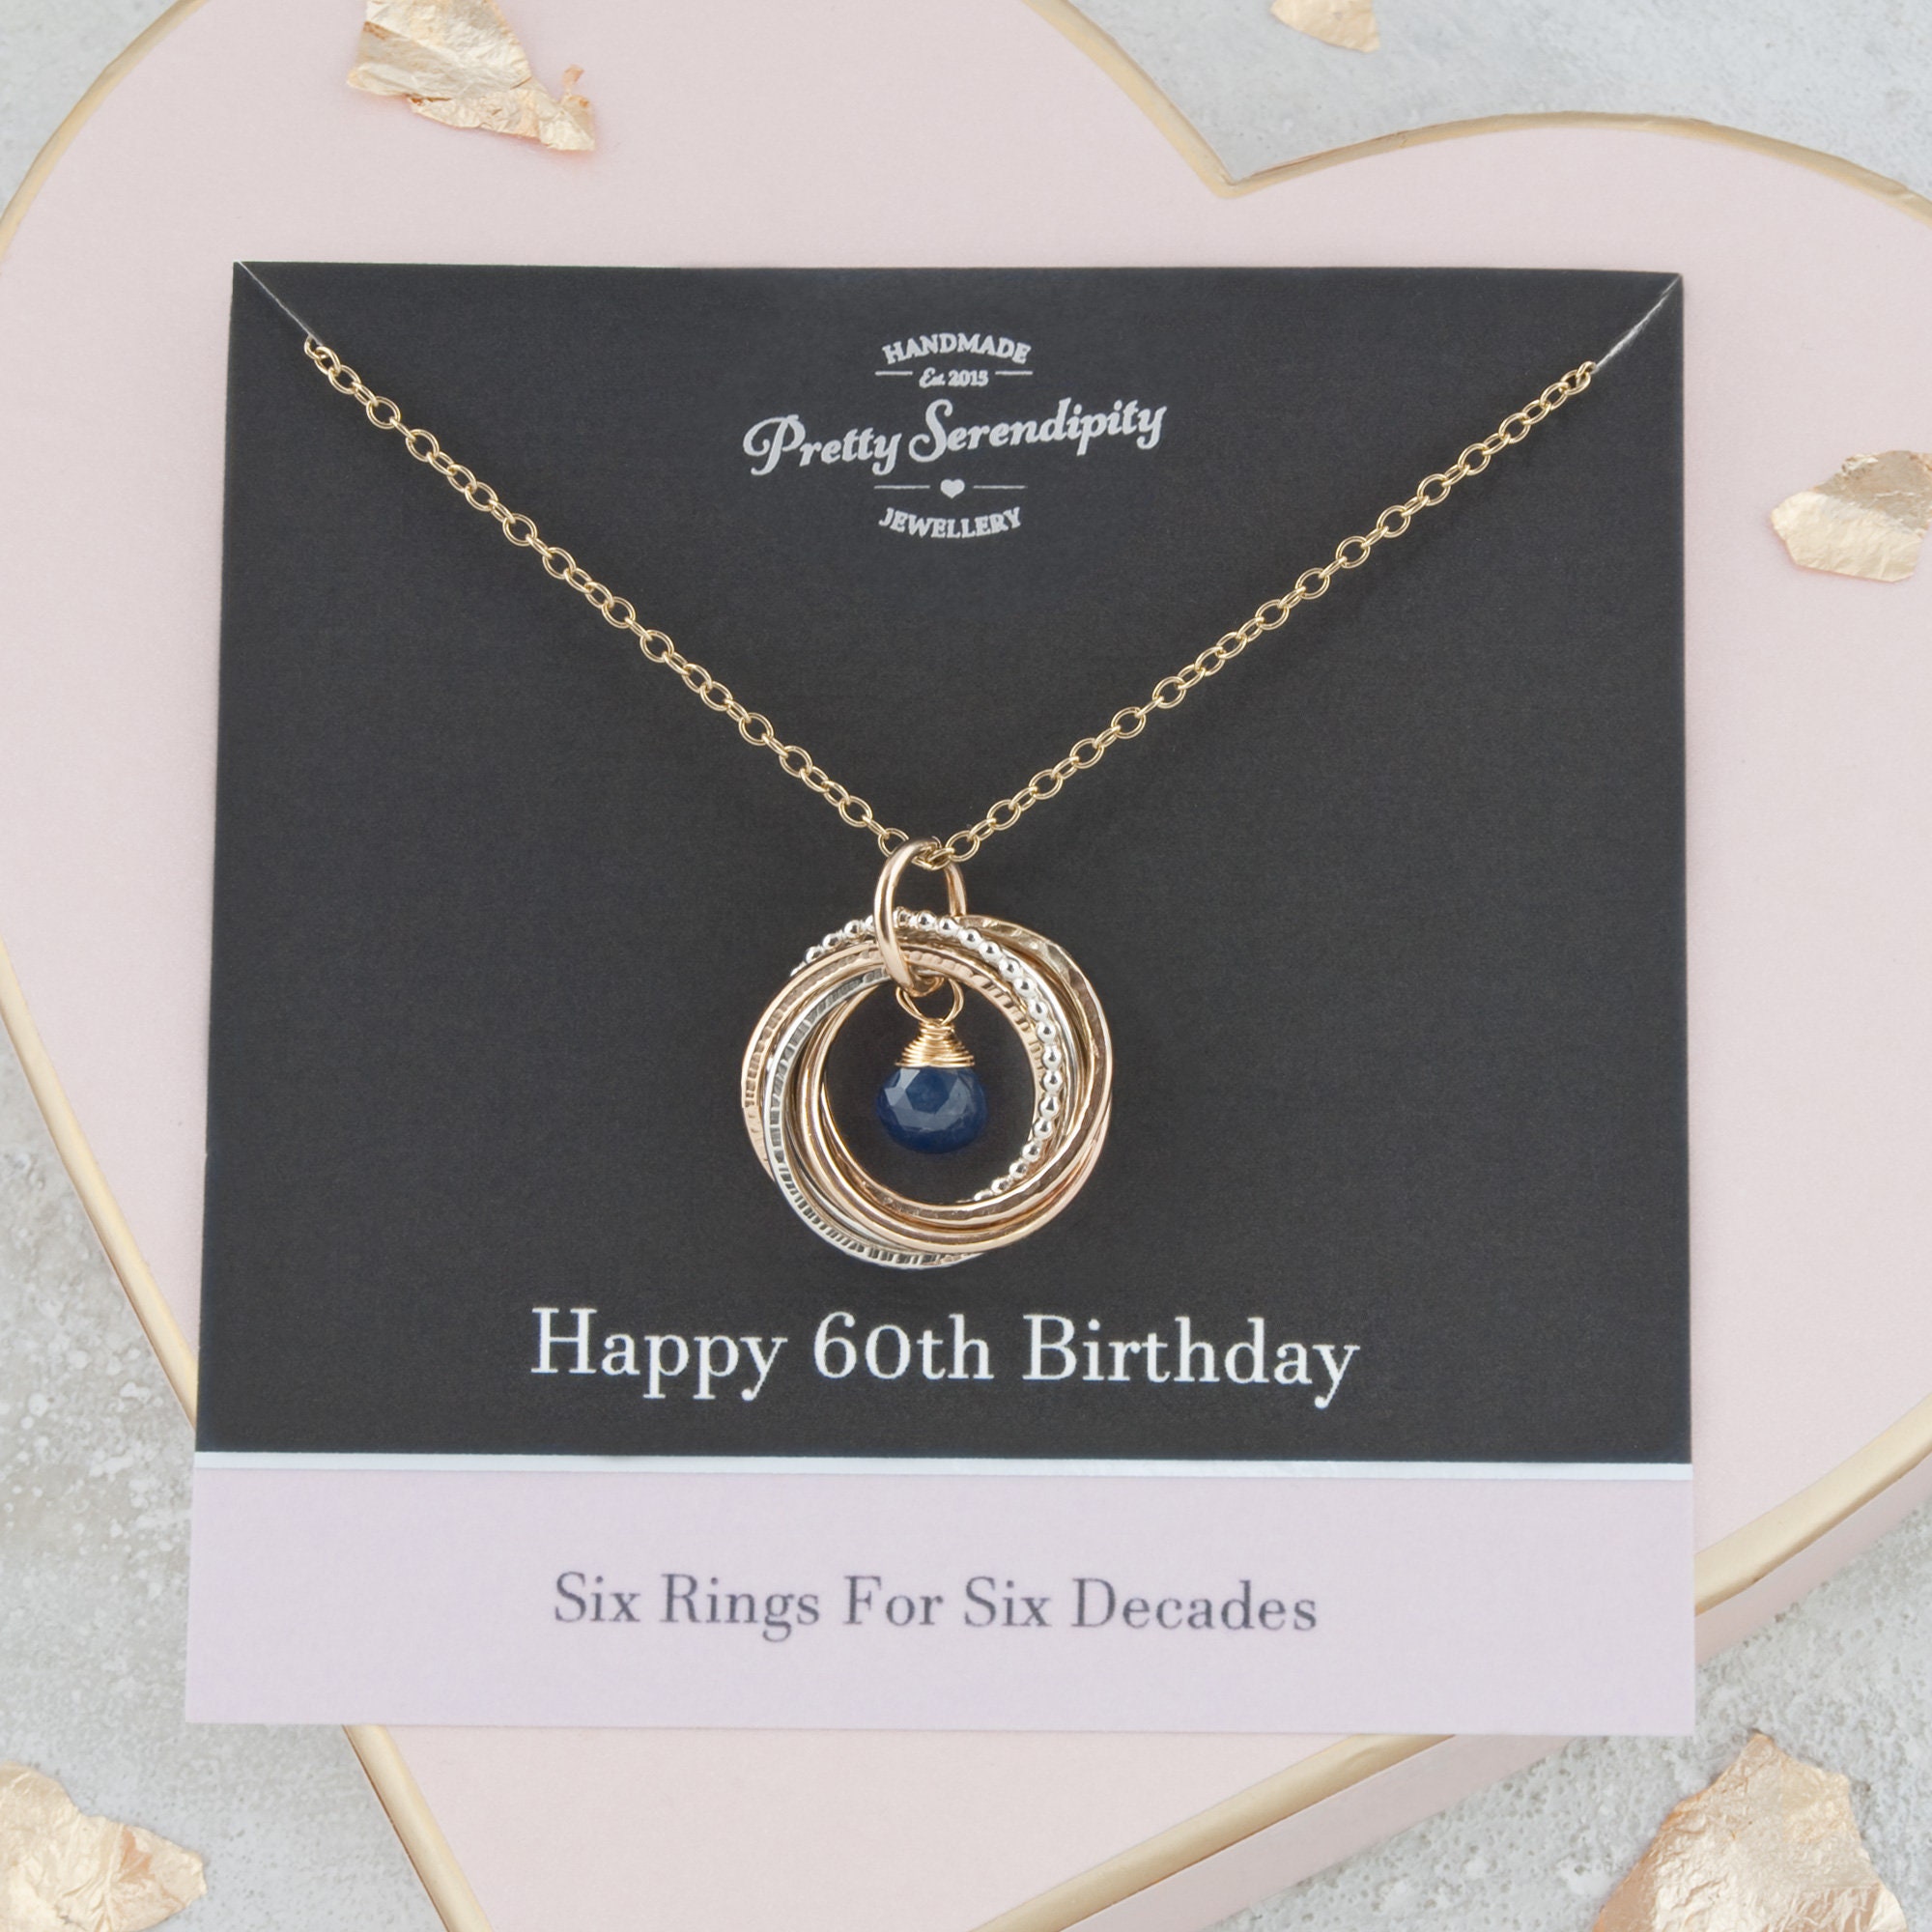 60Th Birthday Mixed Metal Birthstone Necklace - 6 Rings For Decades Gifts Her Silver & 14Ct Gold Fill